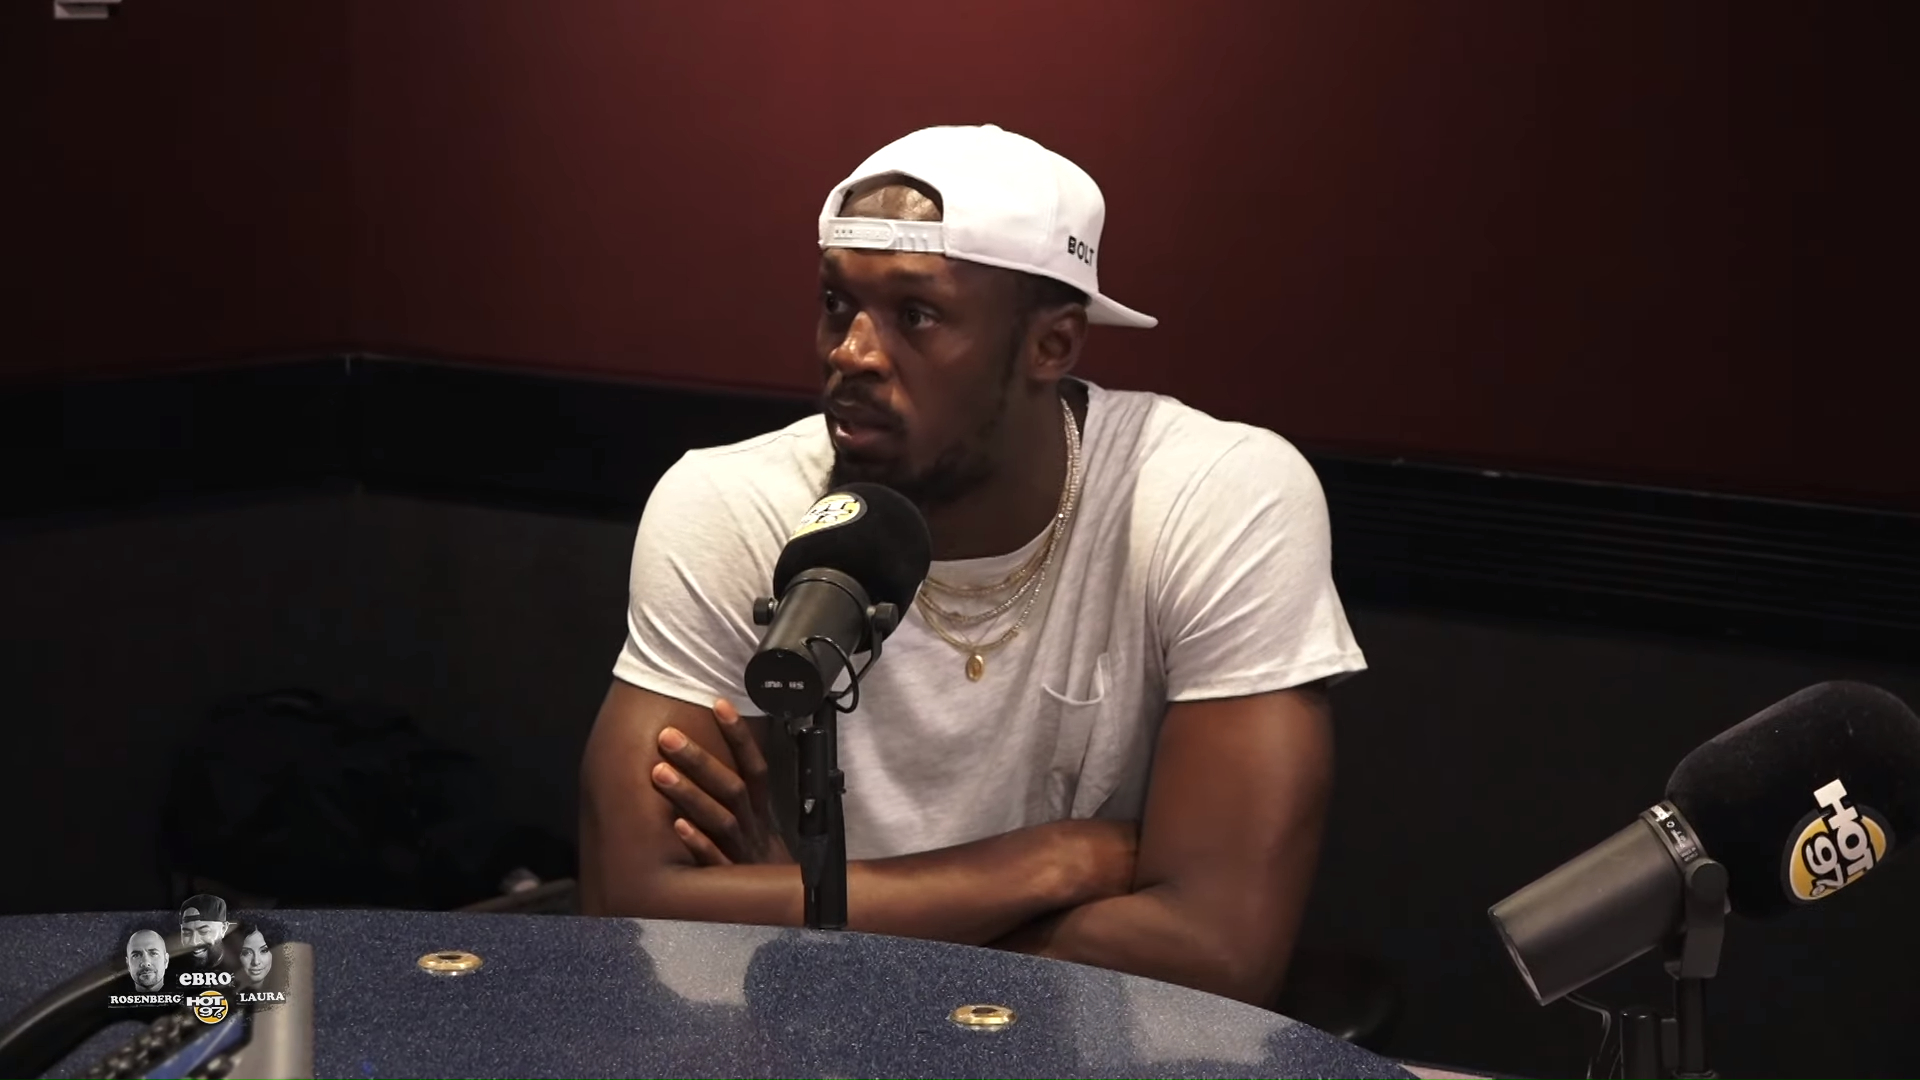 Watch: Usain Bolt speaks on life after track, co-signing New Athletes + New Ventures